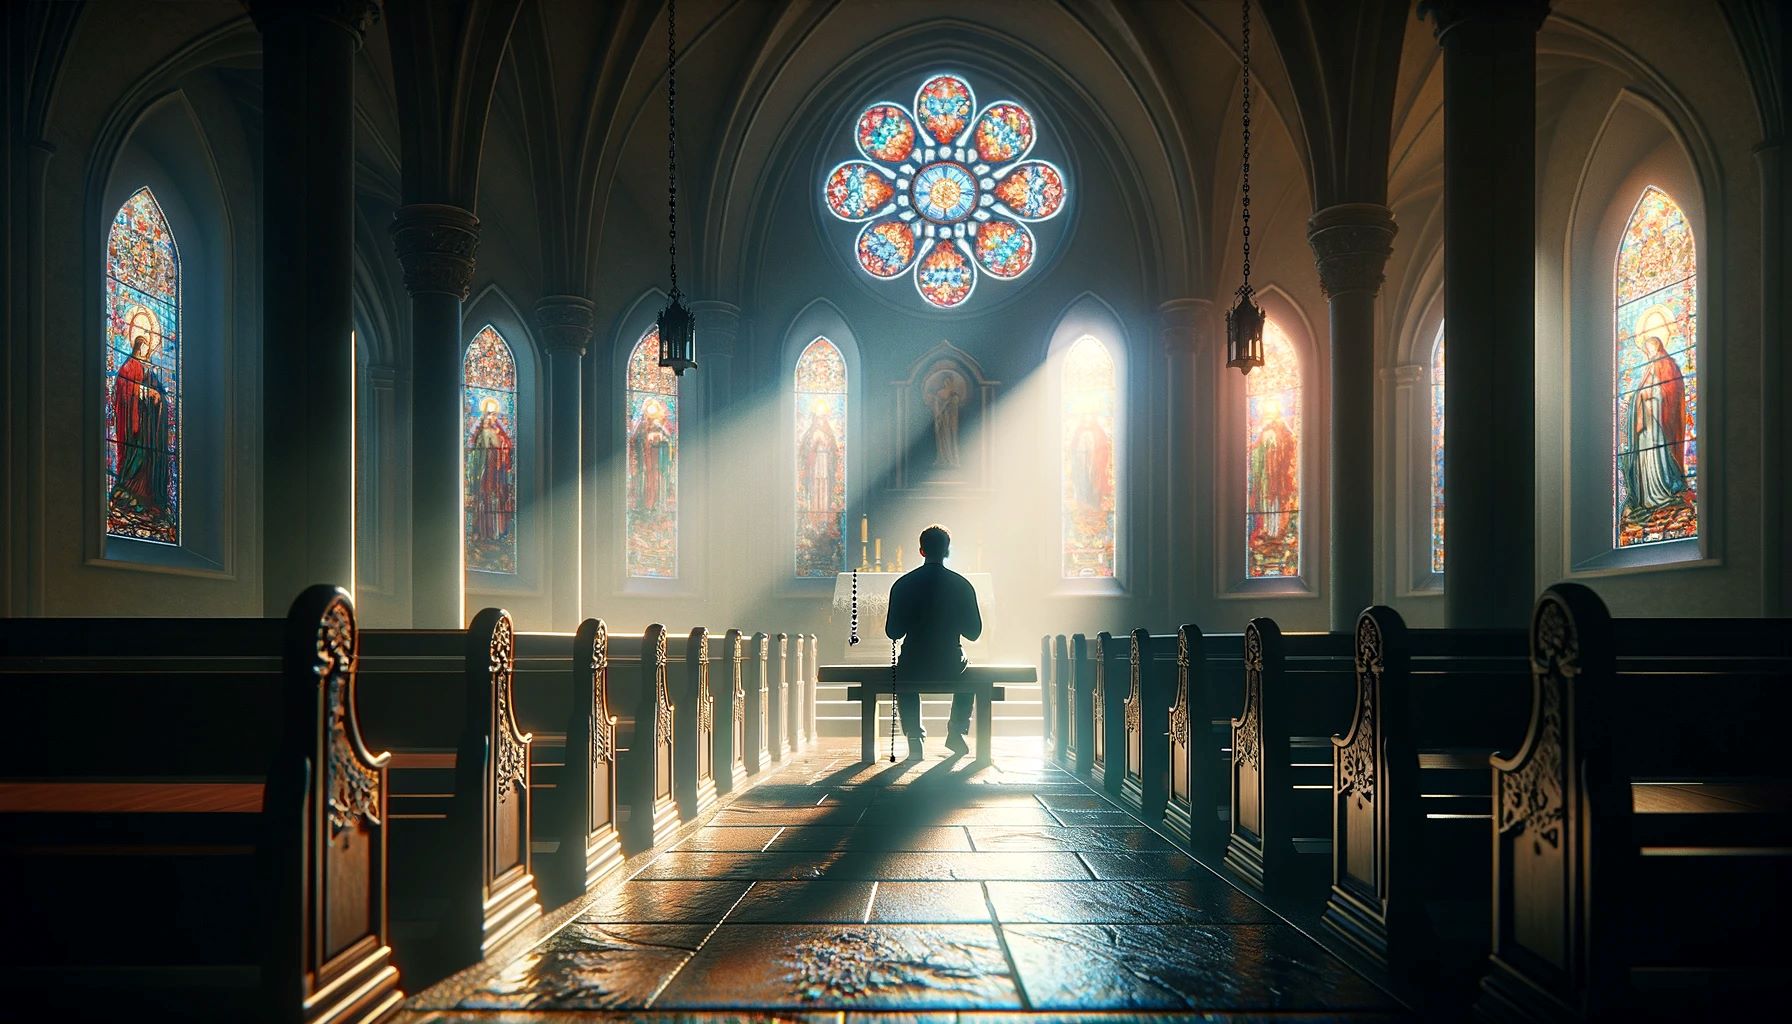 How To Do A Catholic Confession: Step By Step